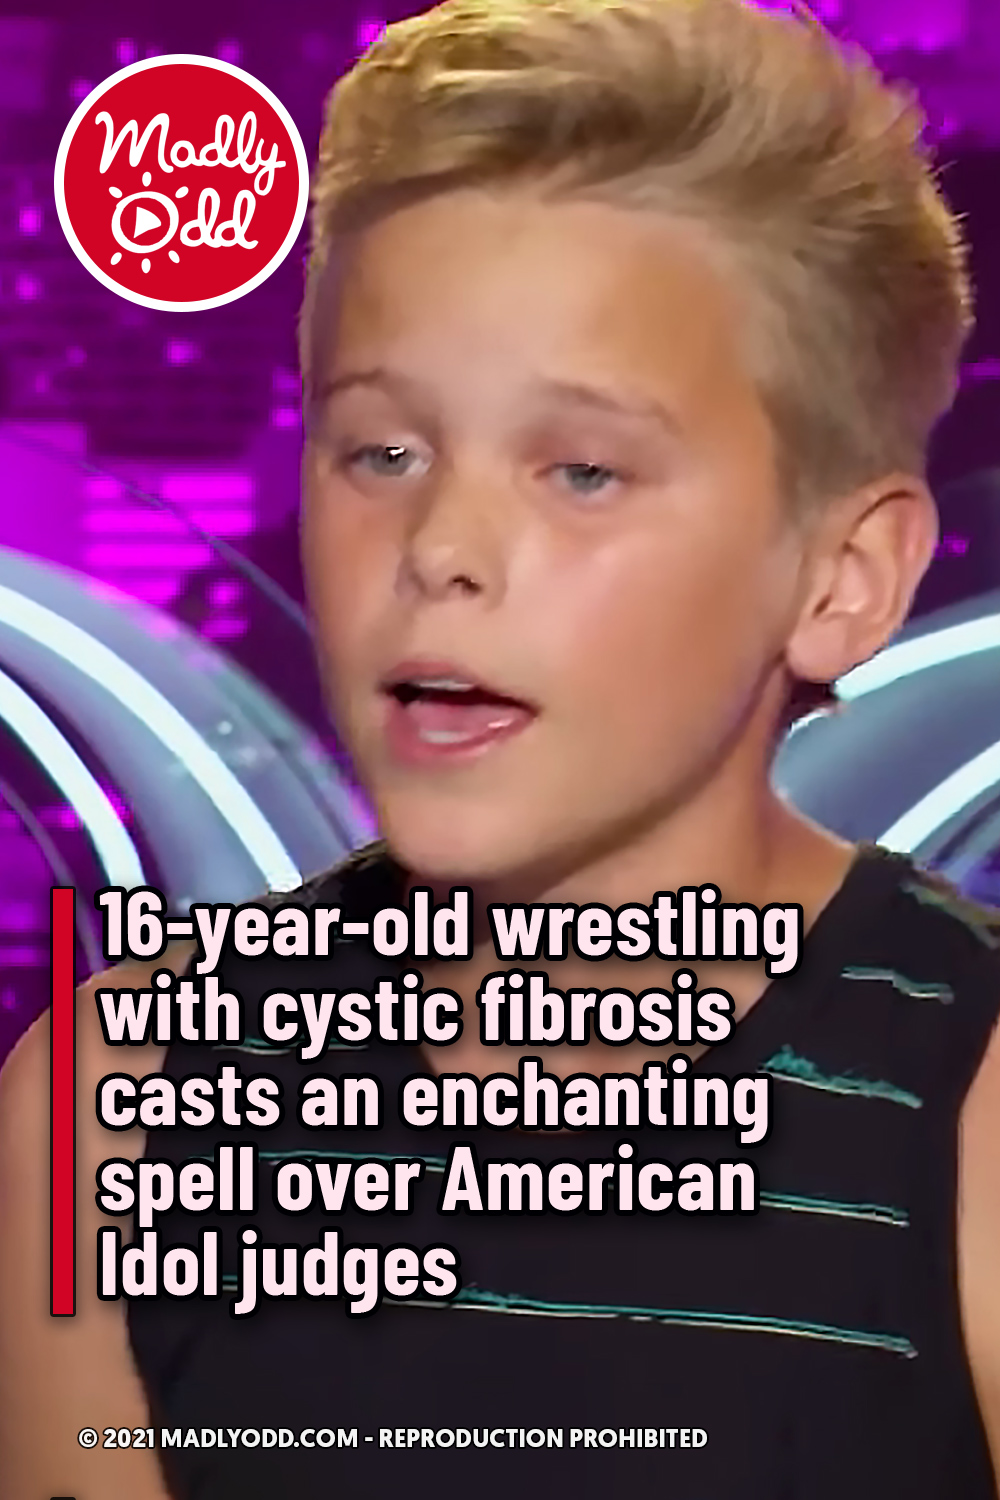 16-year-old wrestling with cystic fibrosis casts an enchanting spell over American Idol judges